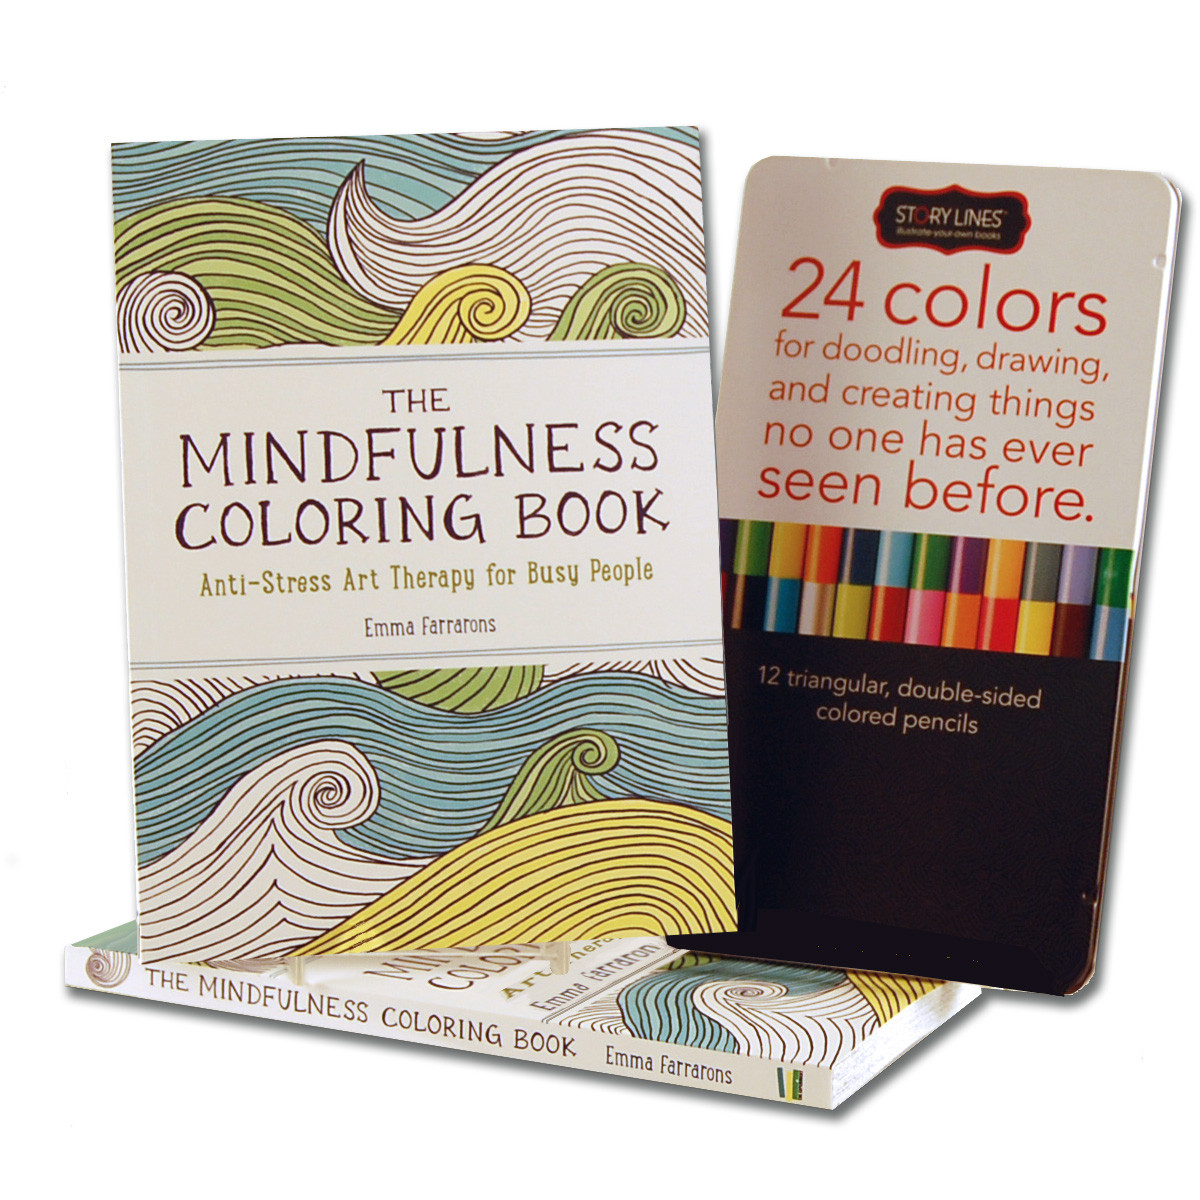 Adult Coloring Book, Unique Corporate Gift Ideas